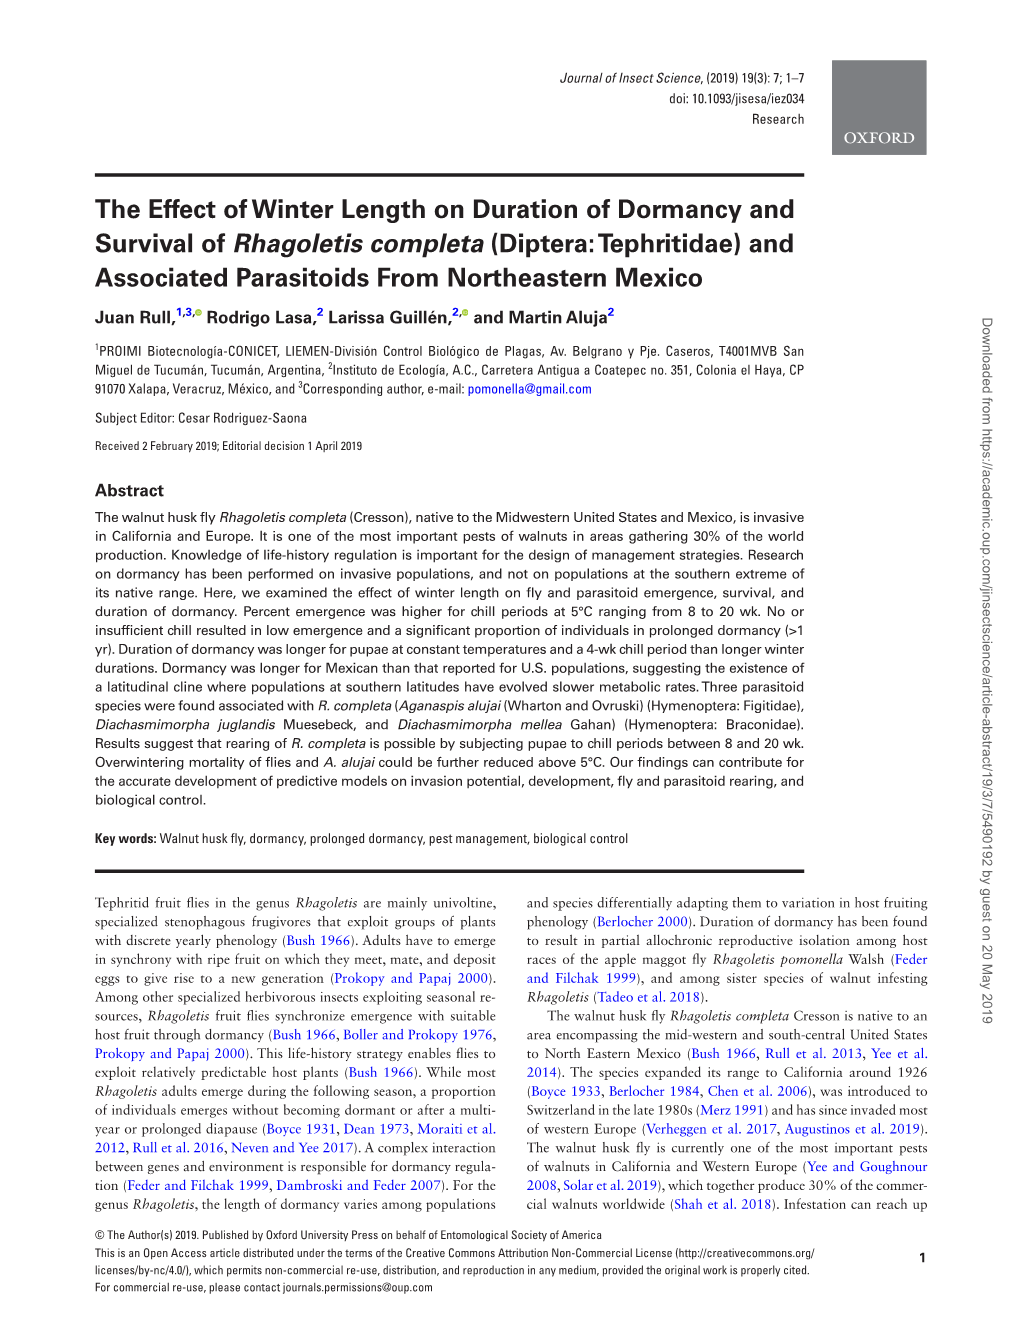 The Effect of Winter Length on Duration of Dormancy and Survival of Rhagoletis Completa (Diptera: Tephritidae) and Associated Parasitoids from Northeastern Mexico